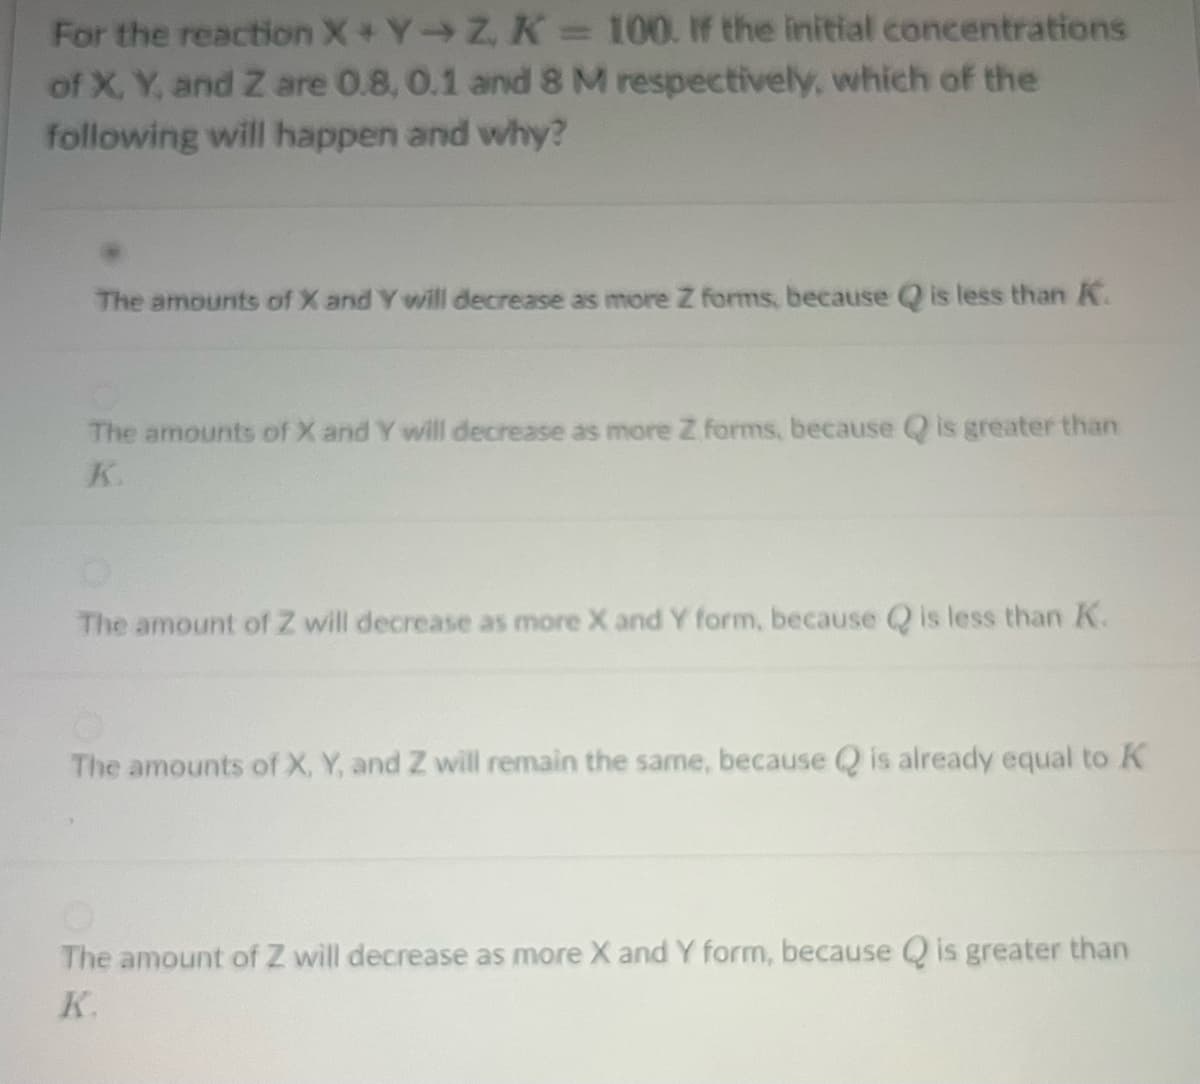 For the reaction X+Y-Z, K = 100. If the initial concentrations
of X, Y, and Z are 0.8, 0.1 and 8 M respectively, which of the
following will happen and why?
The amounts of X and Y will decrease as more Z forms, because Q is less than K.
The amounts of X and Y will decrease as more Z forms, because Q is greater than
K.
The amount of Z will decrease as more X and Y form, because is less than K.
The amounts of X, Y, and Z will remain the same, because is already equal to K
The amount of Z will decrease as more X and Y form, because Q is greater than
K.